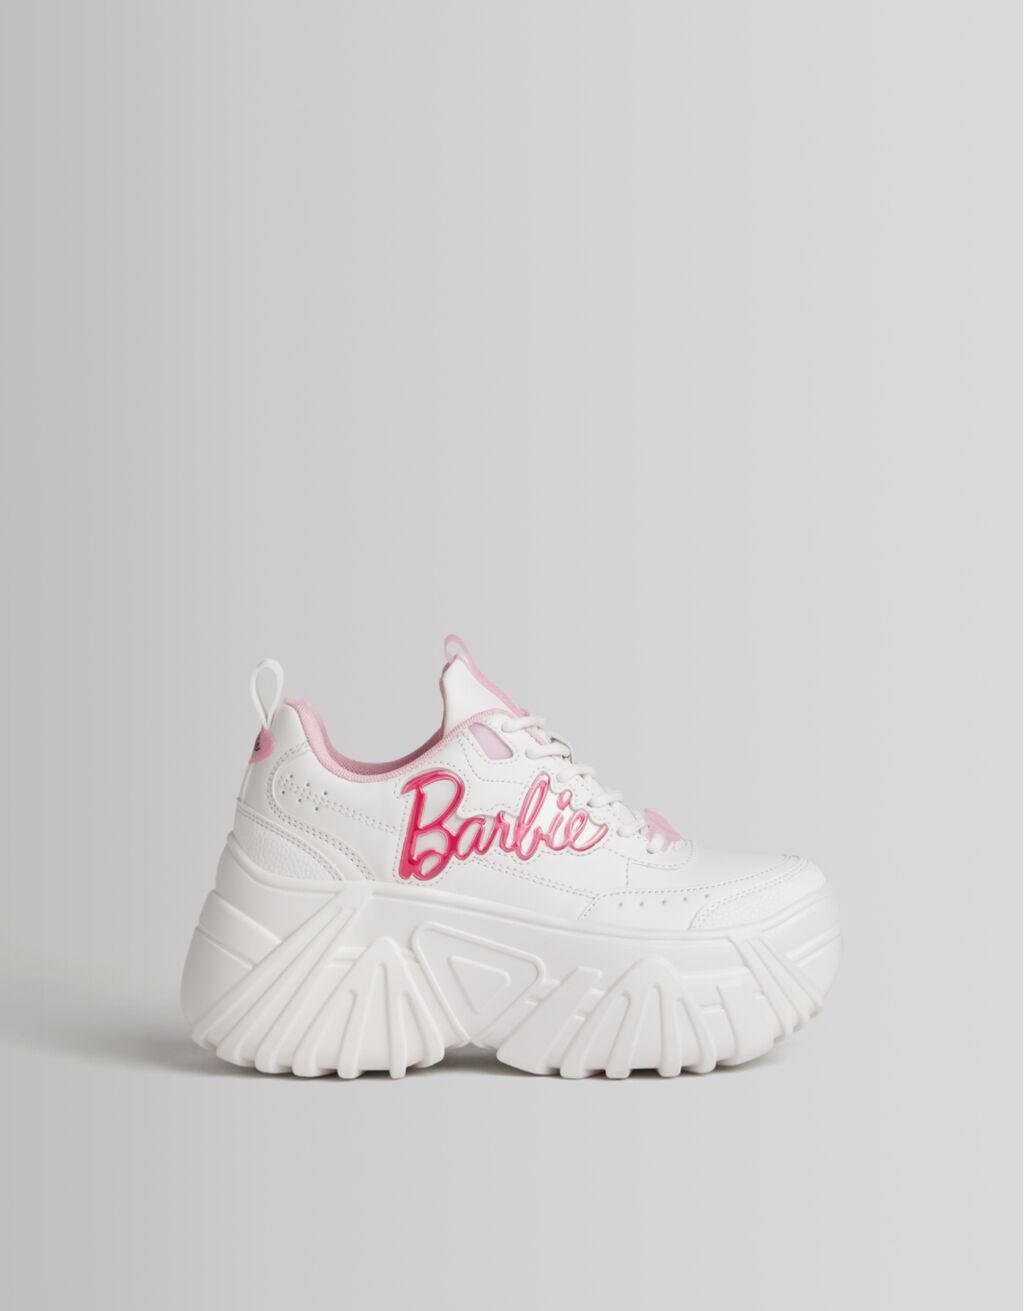 Barbie sneakers from YouLoveIt.com